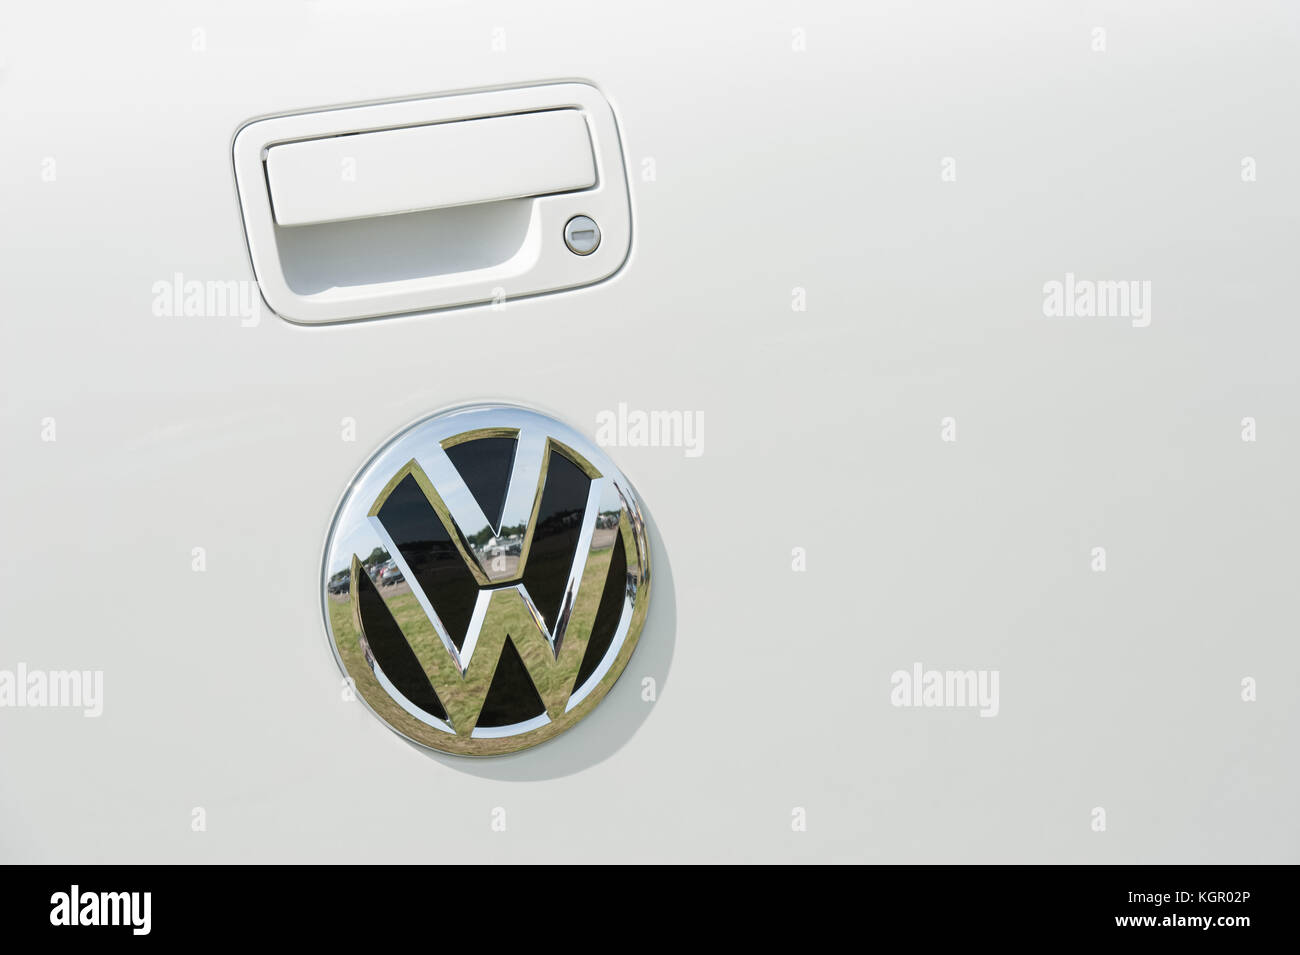 Dunsfold, UK - August 26, 2017: Door panel and manufacturer badge close-up on a Volkswagen automobile at gathering of classic and modern vehicles in D Stock Photo